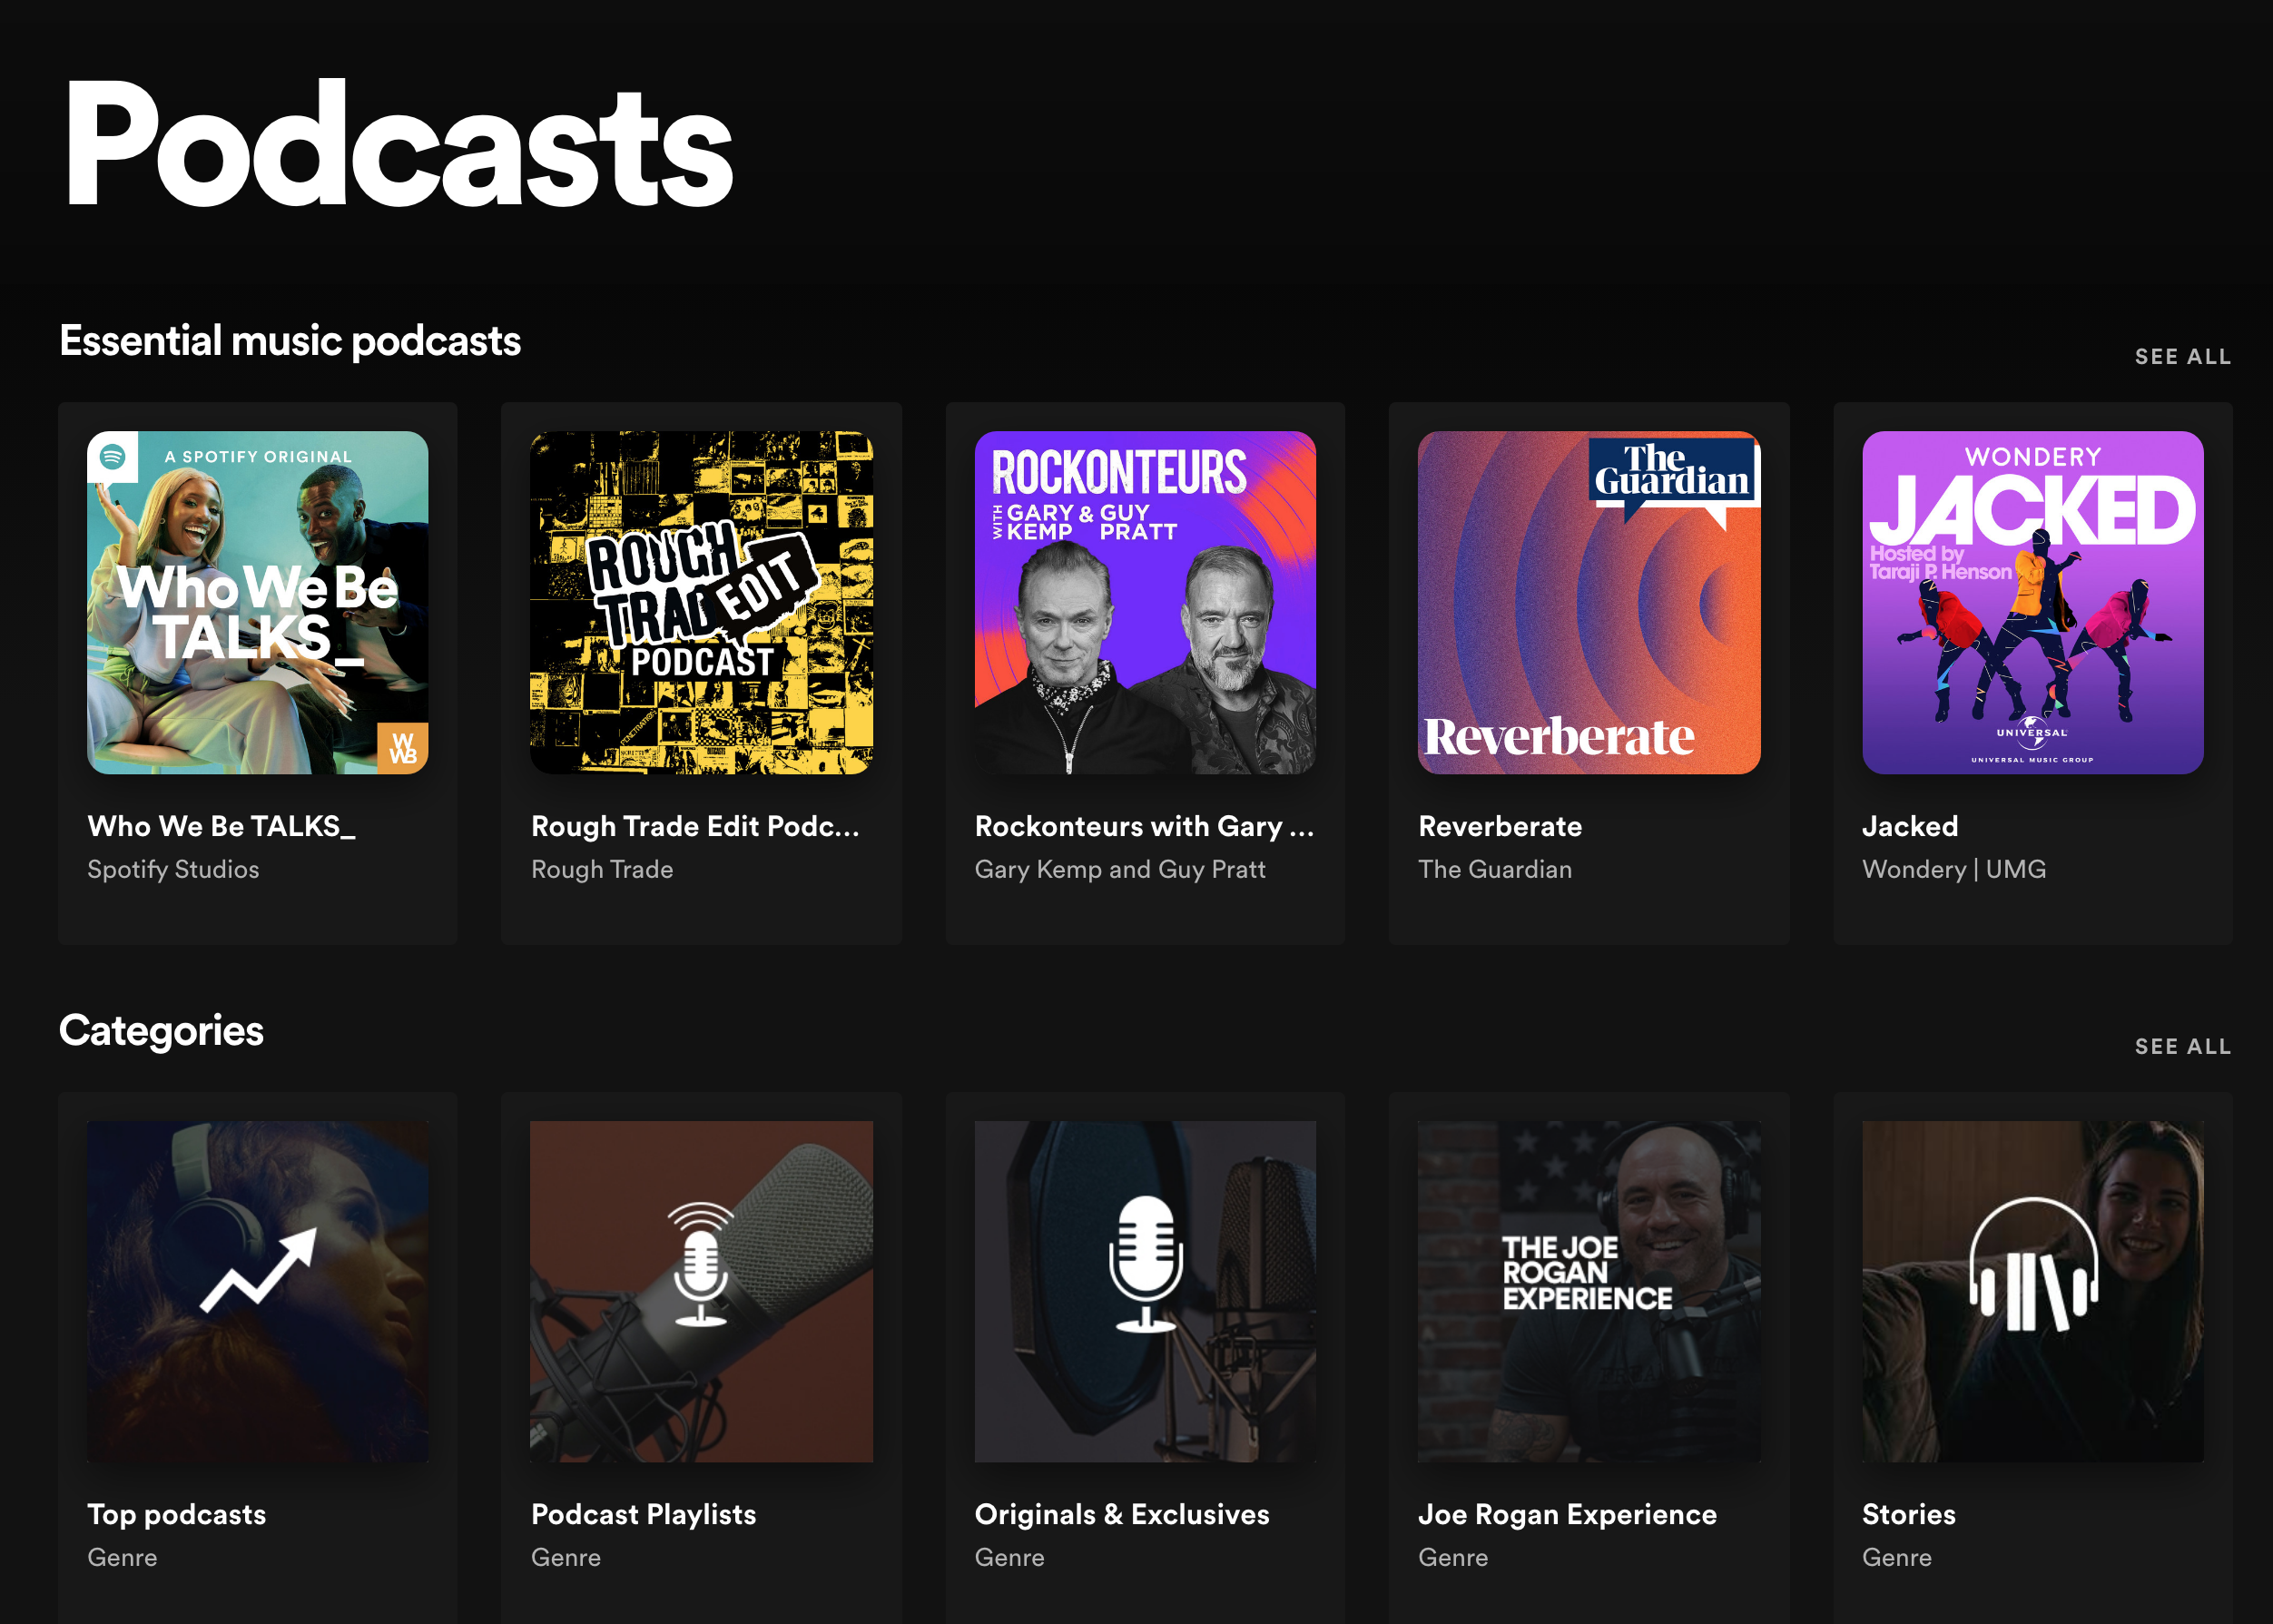 What Is The Top Podcast On Spotify